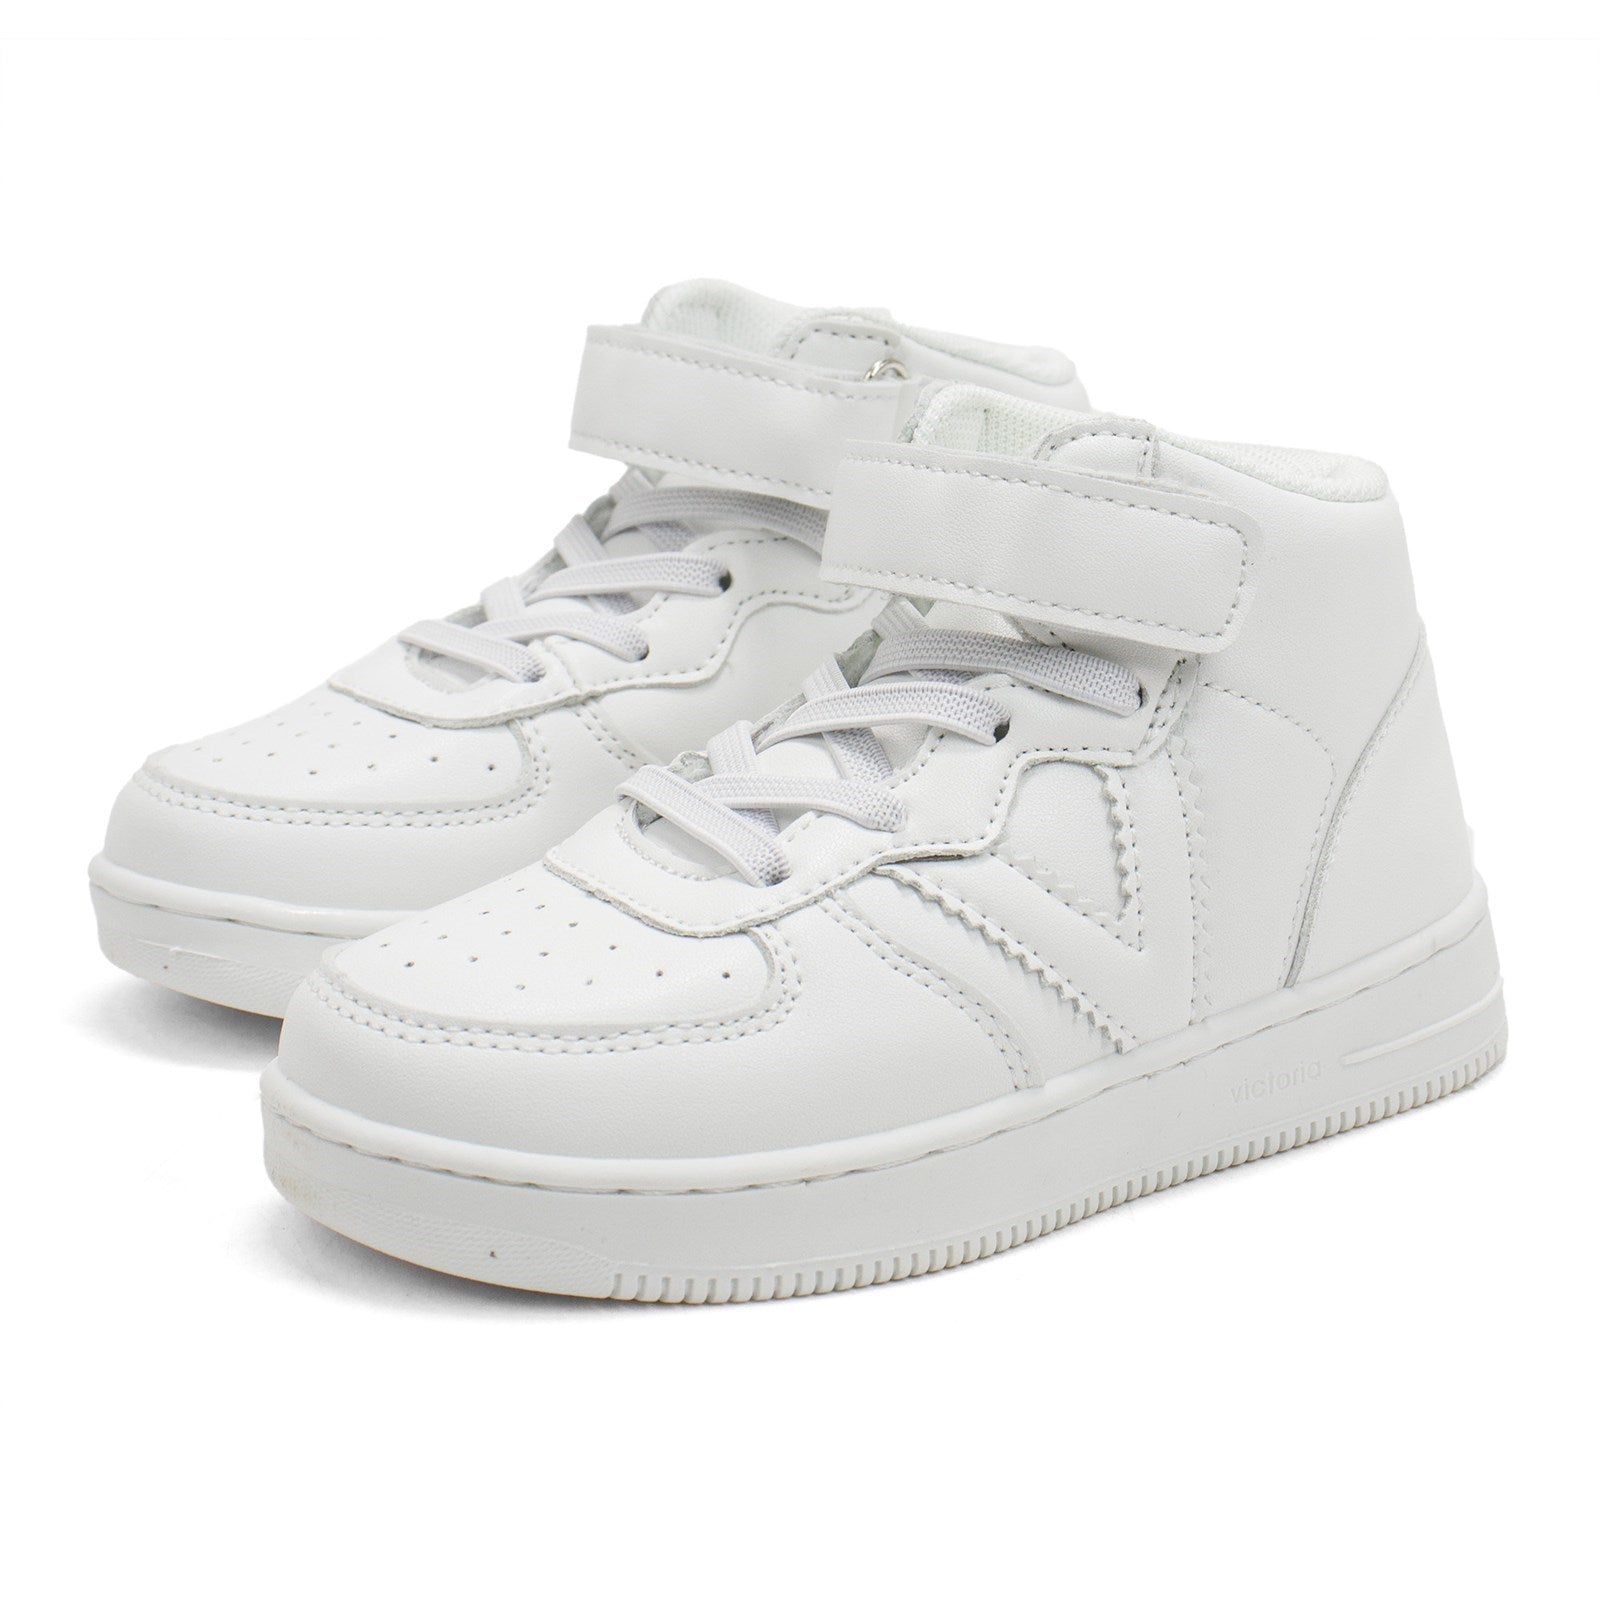 Victoria Boy Tiempo Faux Leather High-Top Sneakers